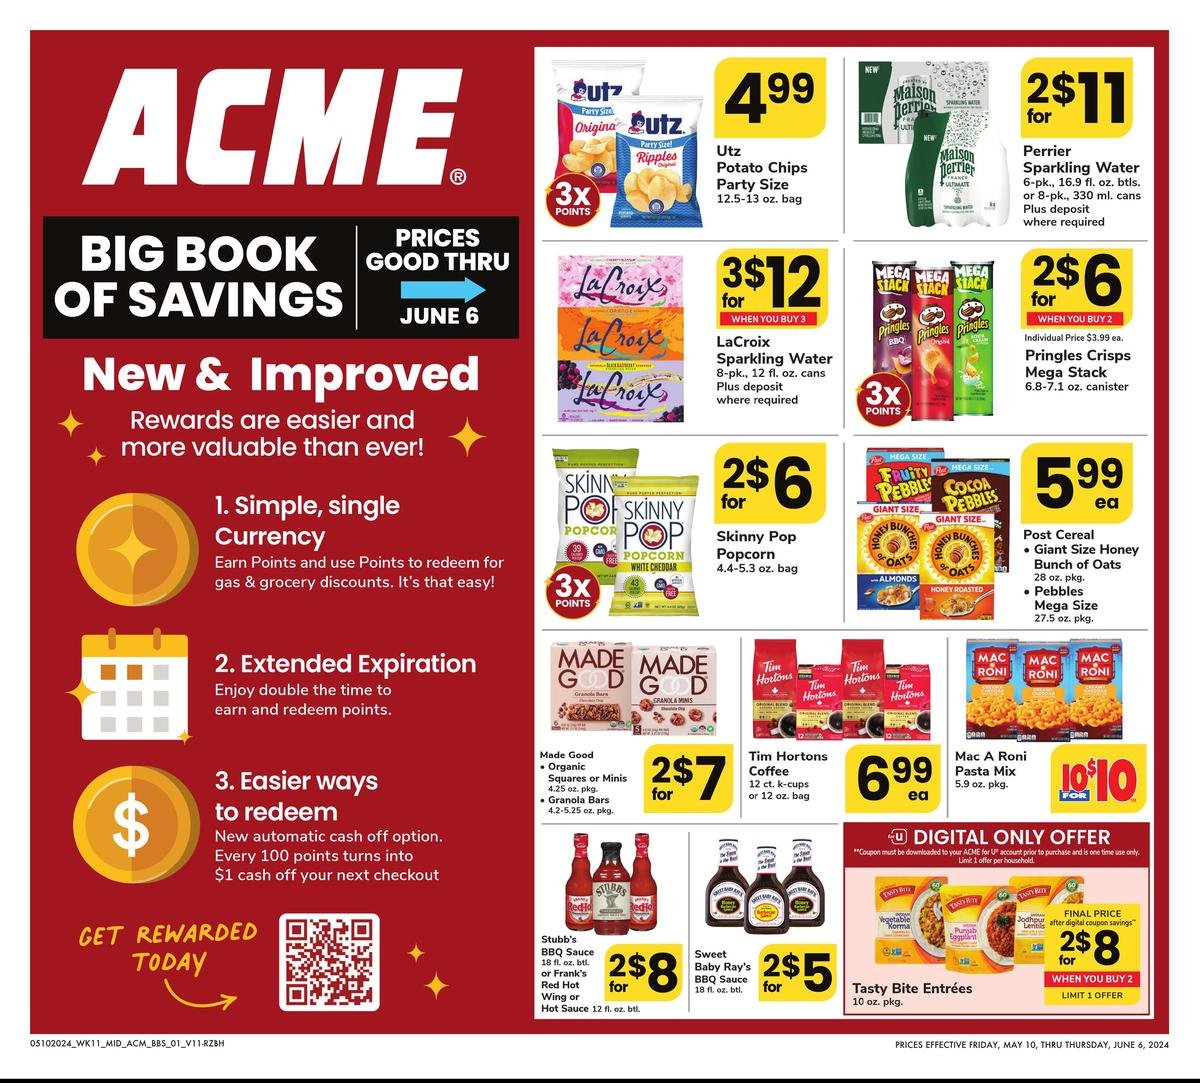 Acme Markets weekly ad - page 1